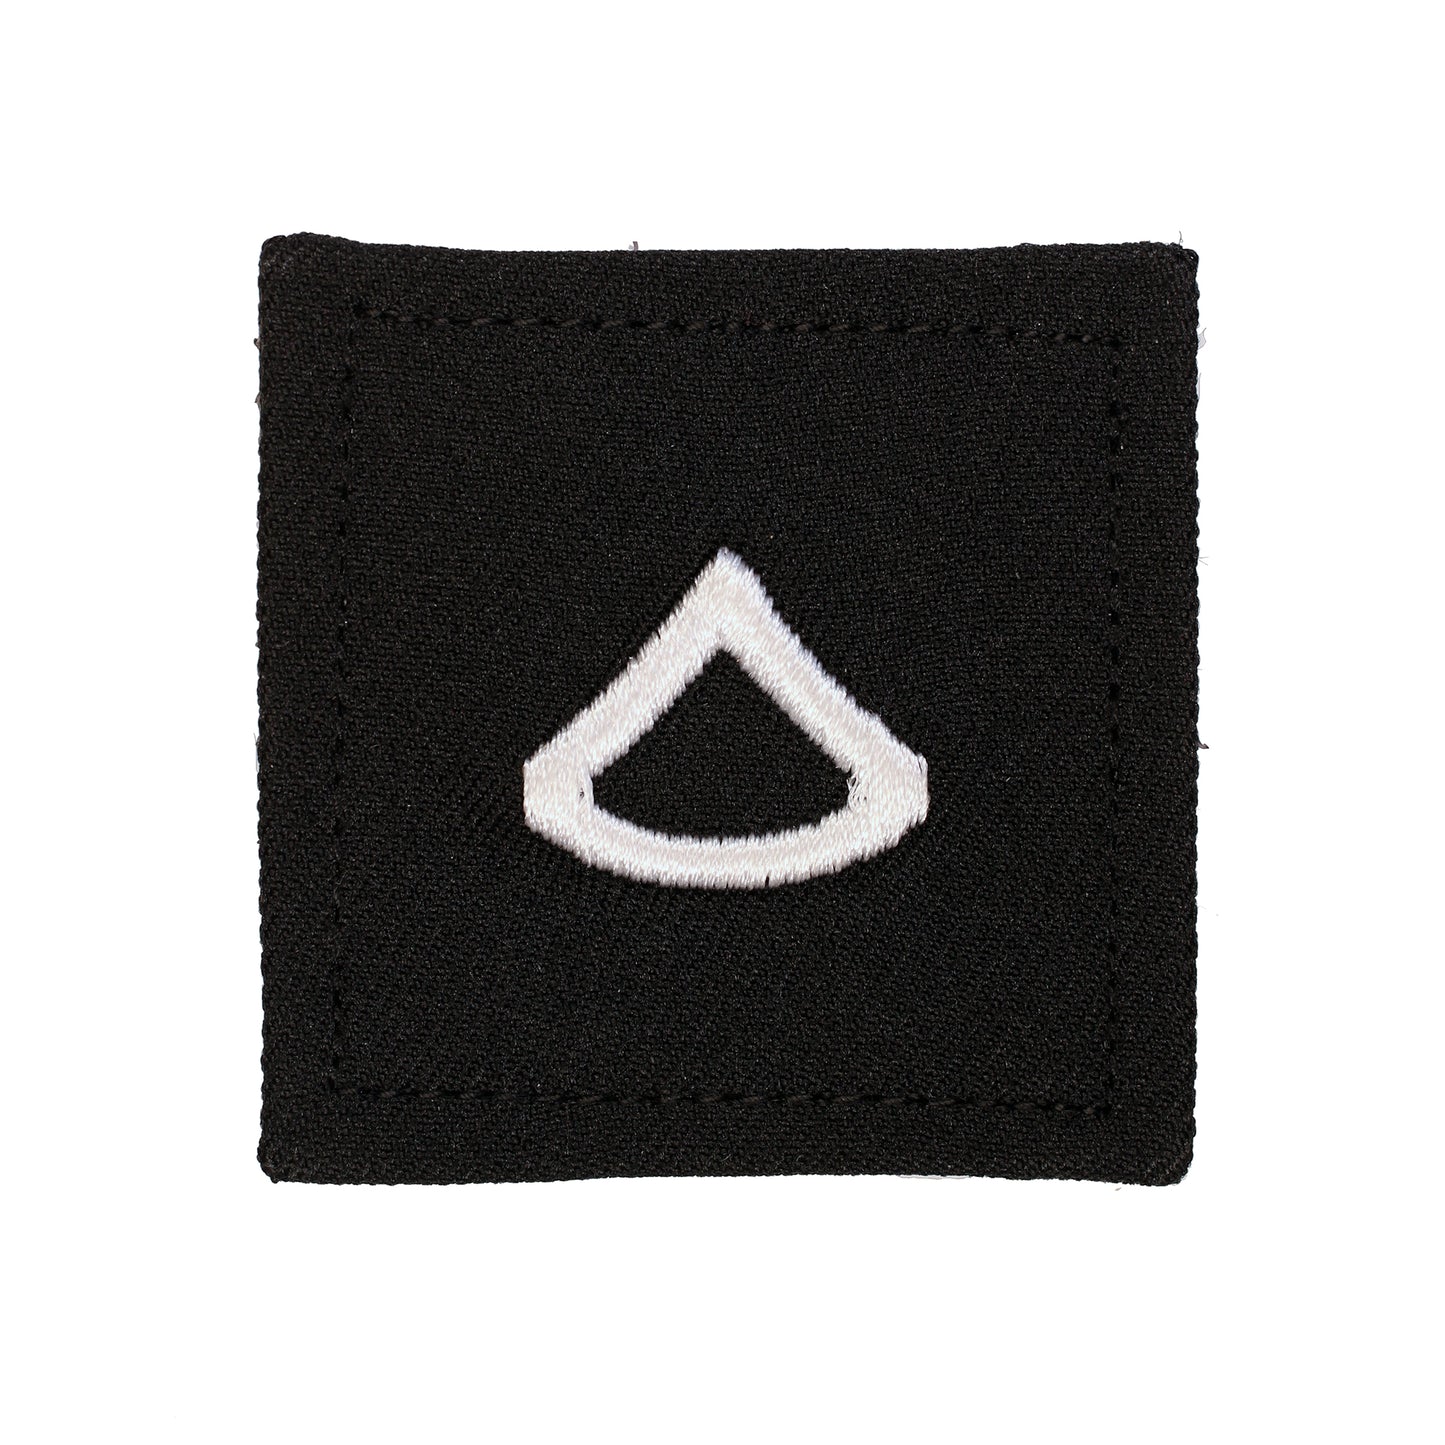 Private First Class 2X2 Black with Hook Fastener